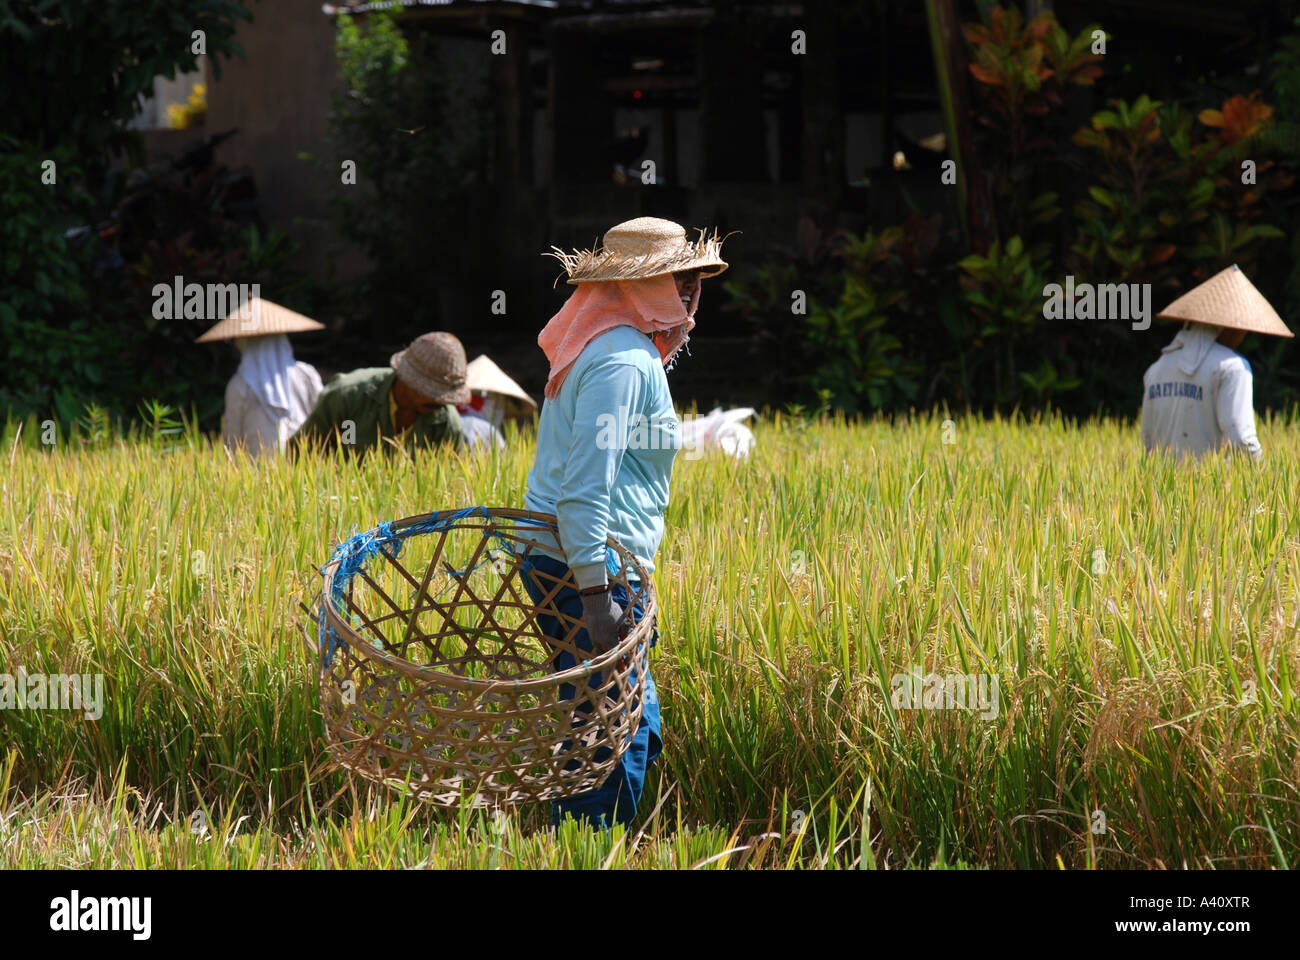 workers tending paddy field Bali Indonesia Stock Photo